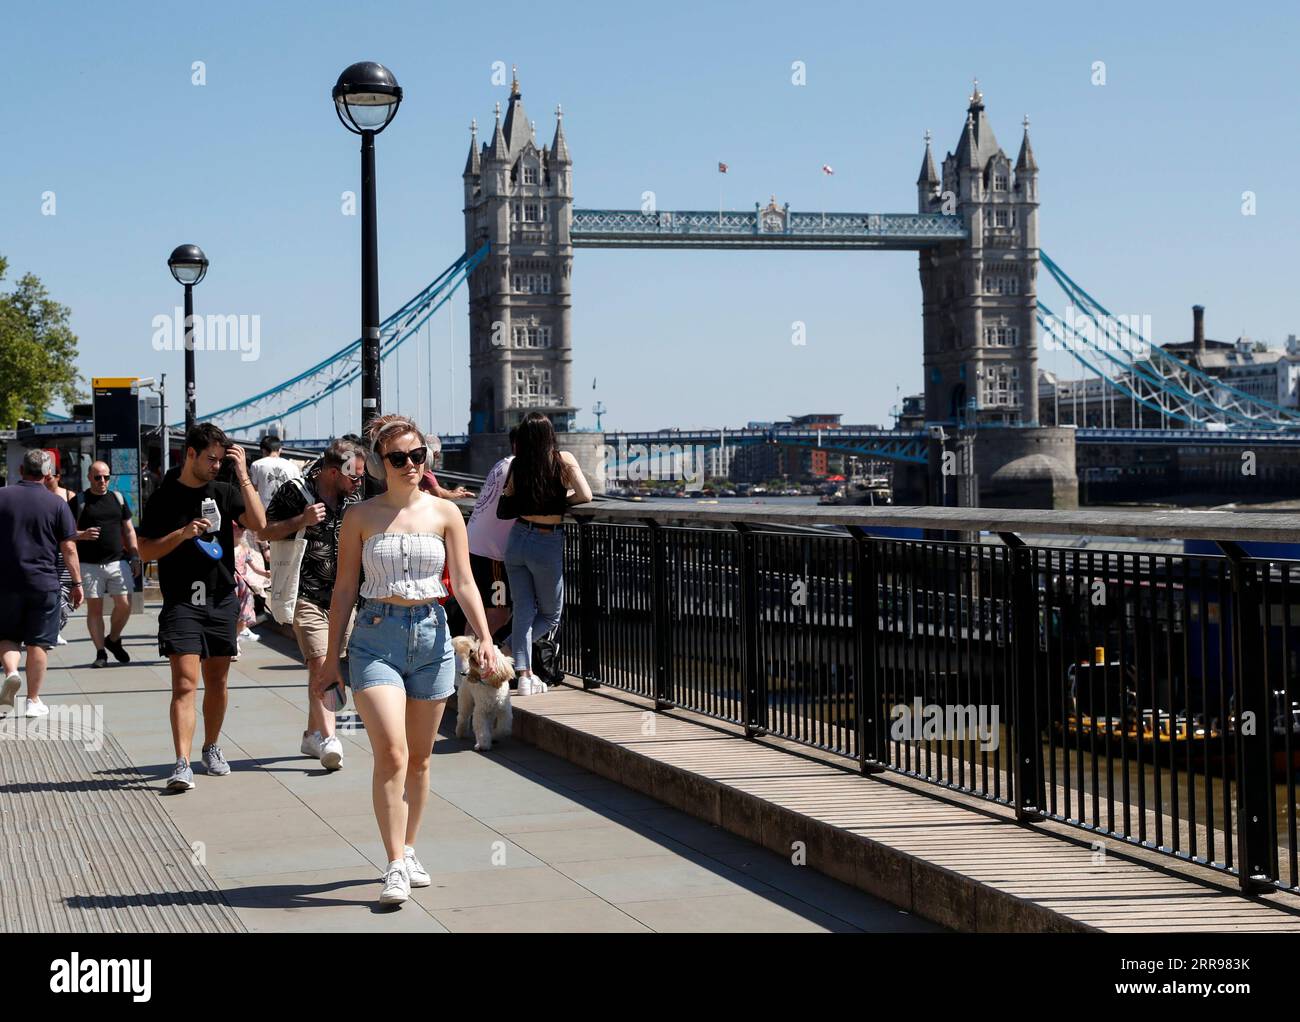 210602 -- LONDON, June 2, 2021 -- People walk along the River Thames, backdropped by the Tower Bridge, in London, Britain, June 1, 2021. Britain remains in a vulnerable position in fighting coronavirus despite the progress of the country s vaccination program, a scientist advising the British government said Tuesday. Professor Adam Finn from the Joint Committee on Vaccination and Immunisation, which advises the government on vaccine priority, said the job to contain the pandemic is not done as large numbers of people are still unvaccinated.  BRITAIN-LONDON-COVID-19 HanxYan PUBLICATIONxNOTxINxC Stock Photo